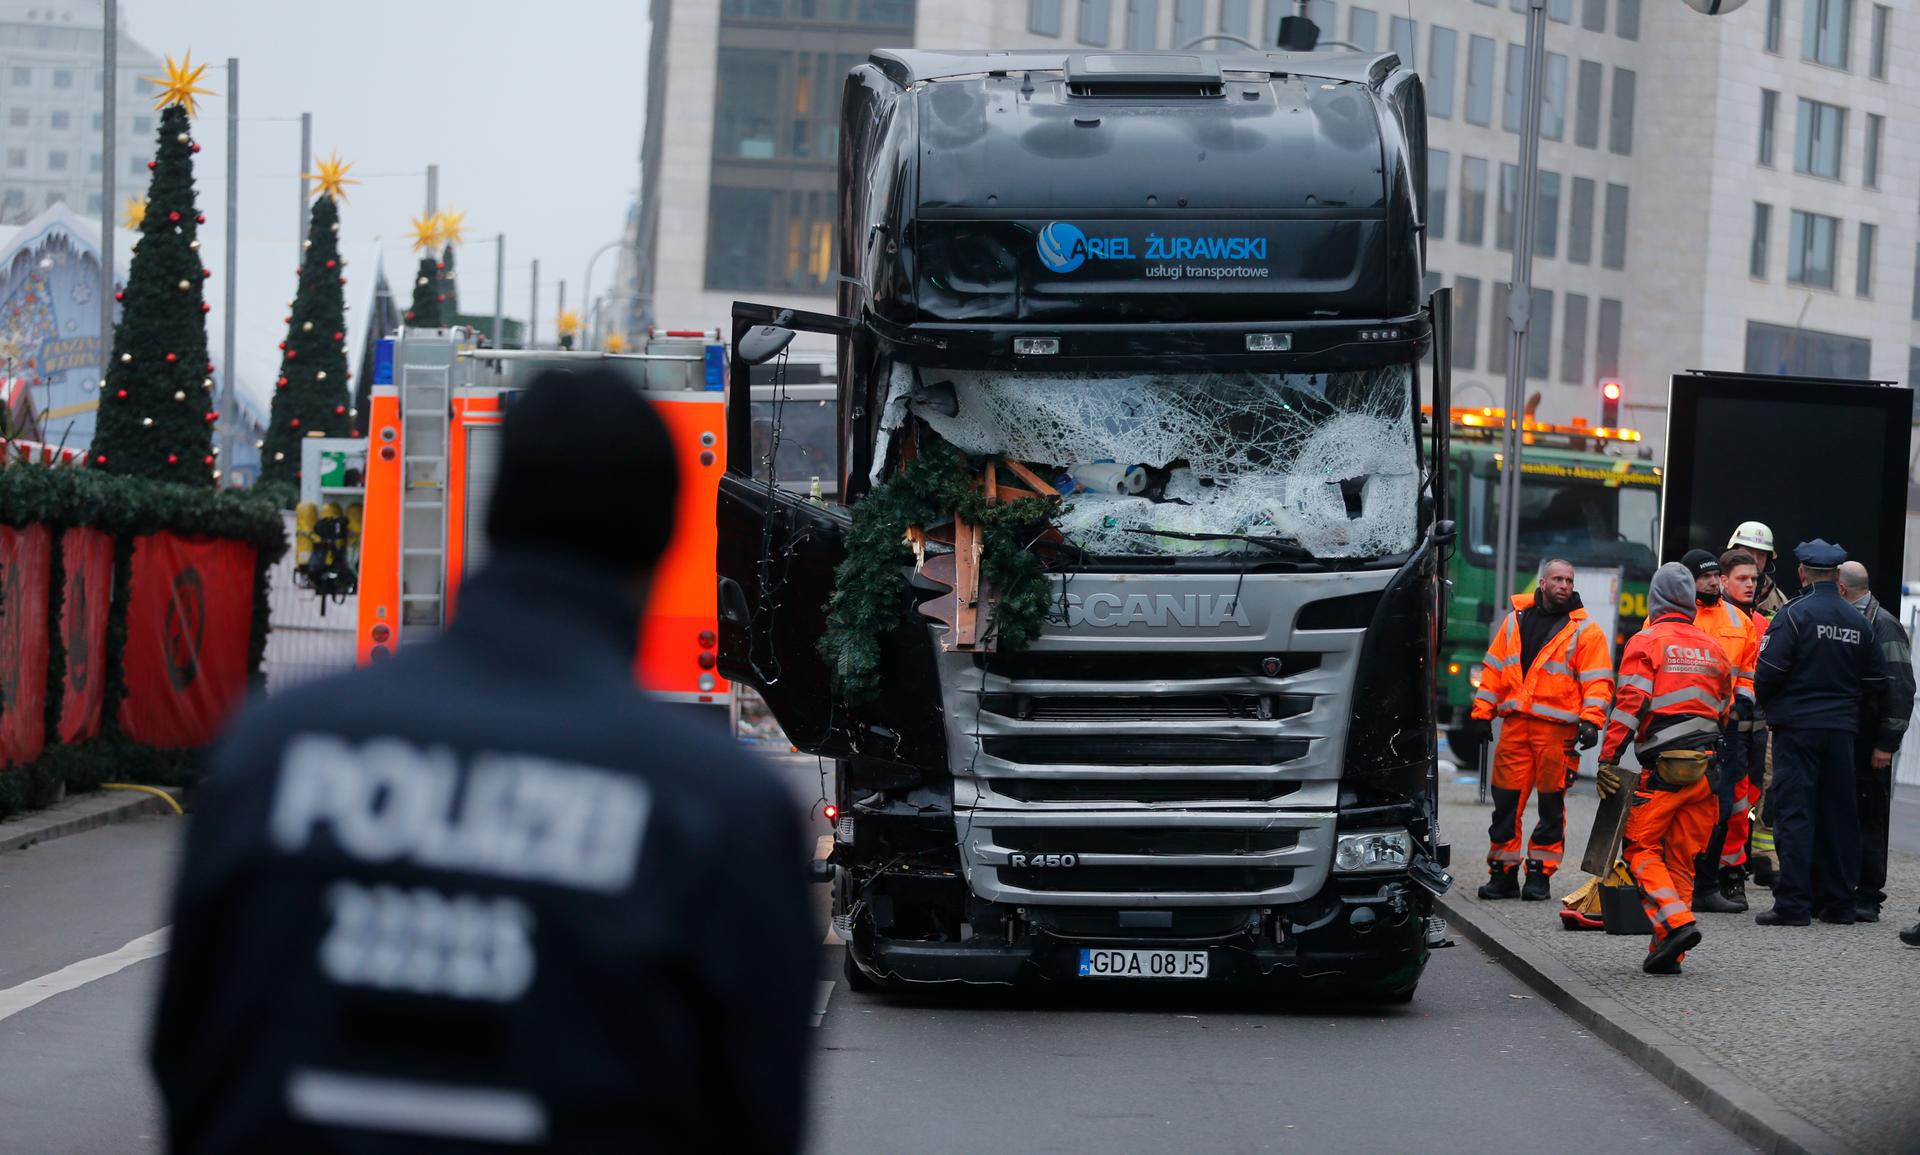 Police stand in front of the truck which ploughed last night into a crowded Christmas market in the German capital Berlin, Germany, December 20, 2016.